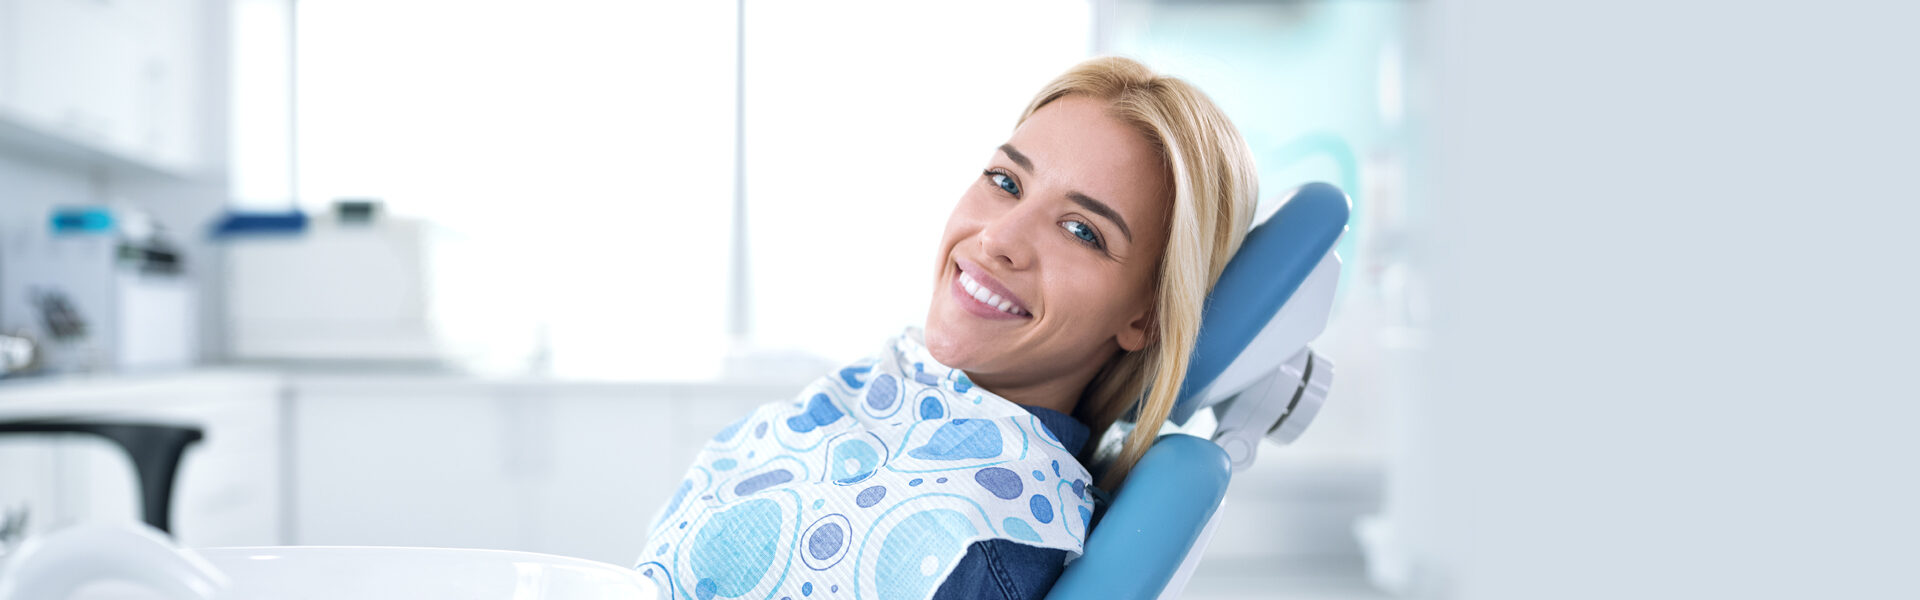 Dental Exams & Cleanings in Middleburg, PA 